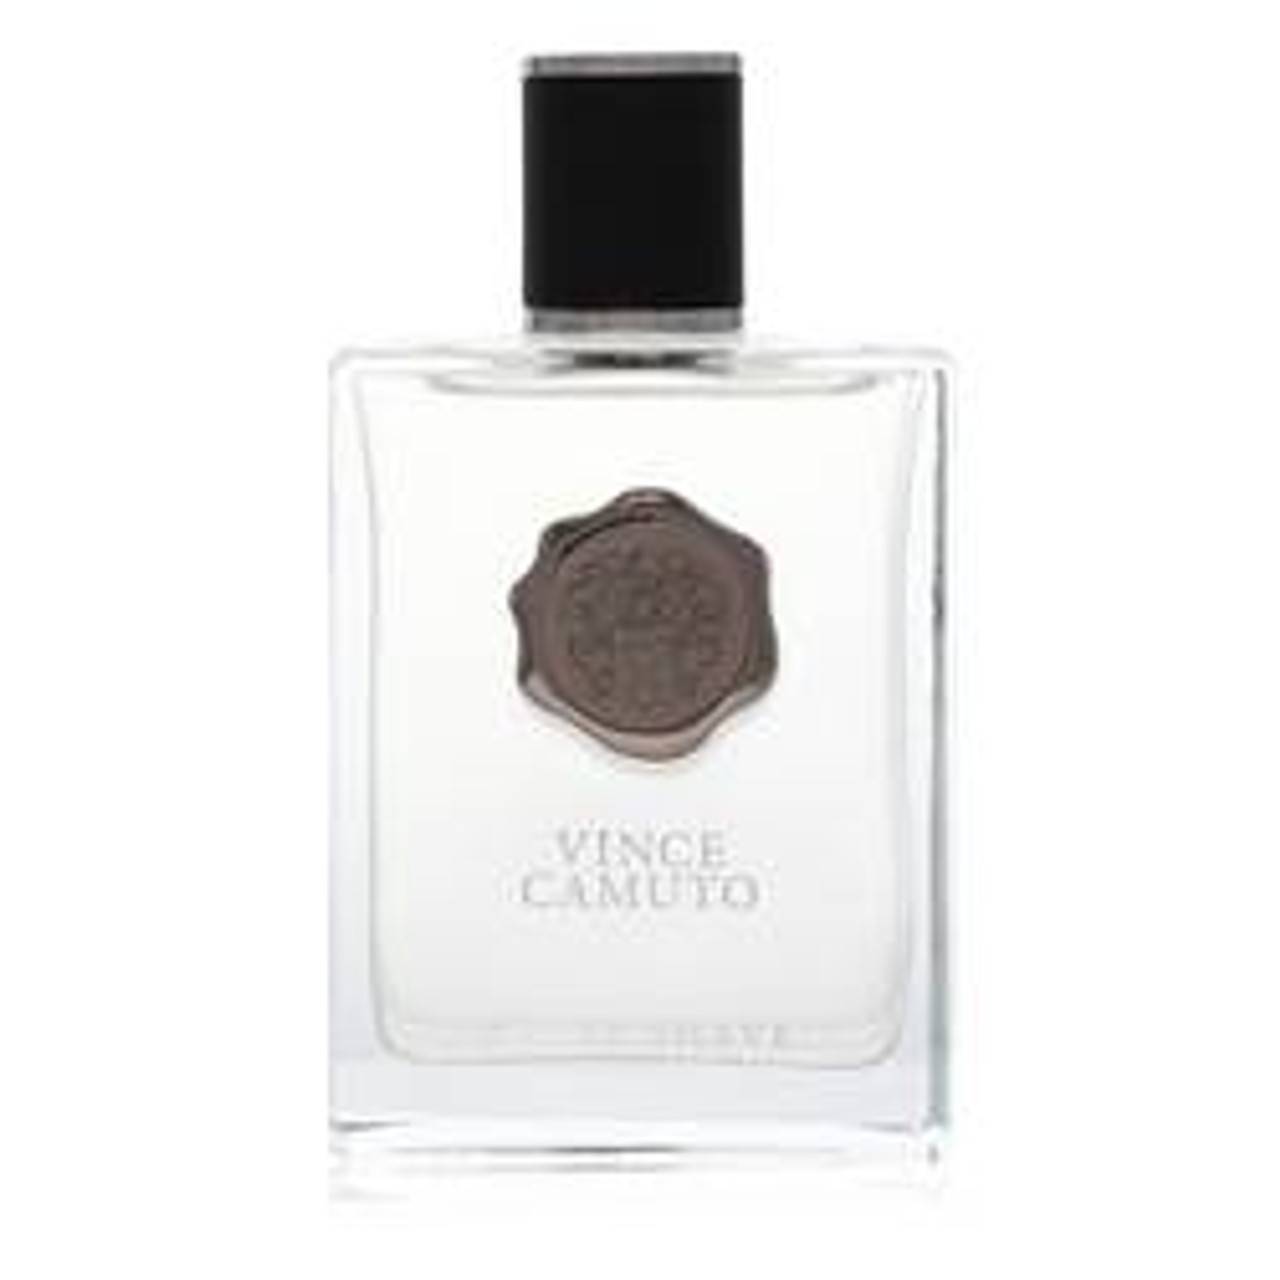 Vince Camuto Cologne By Vince Camuto After Shave (unboxed) 3.4 oz for Men - [From 23.00 - Choose pk Qty ] - *Ships from Miami